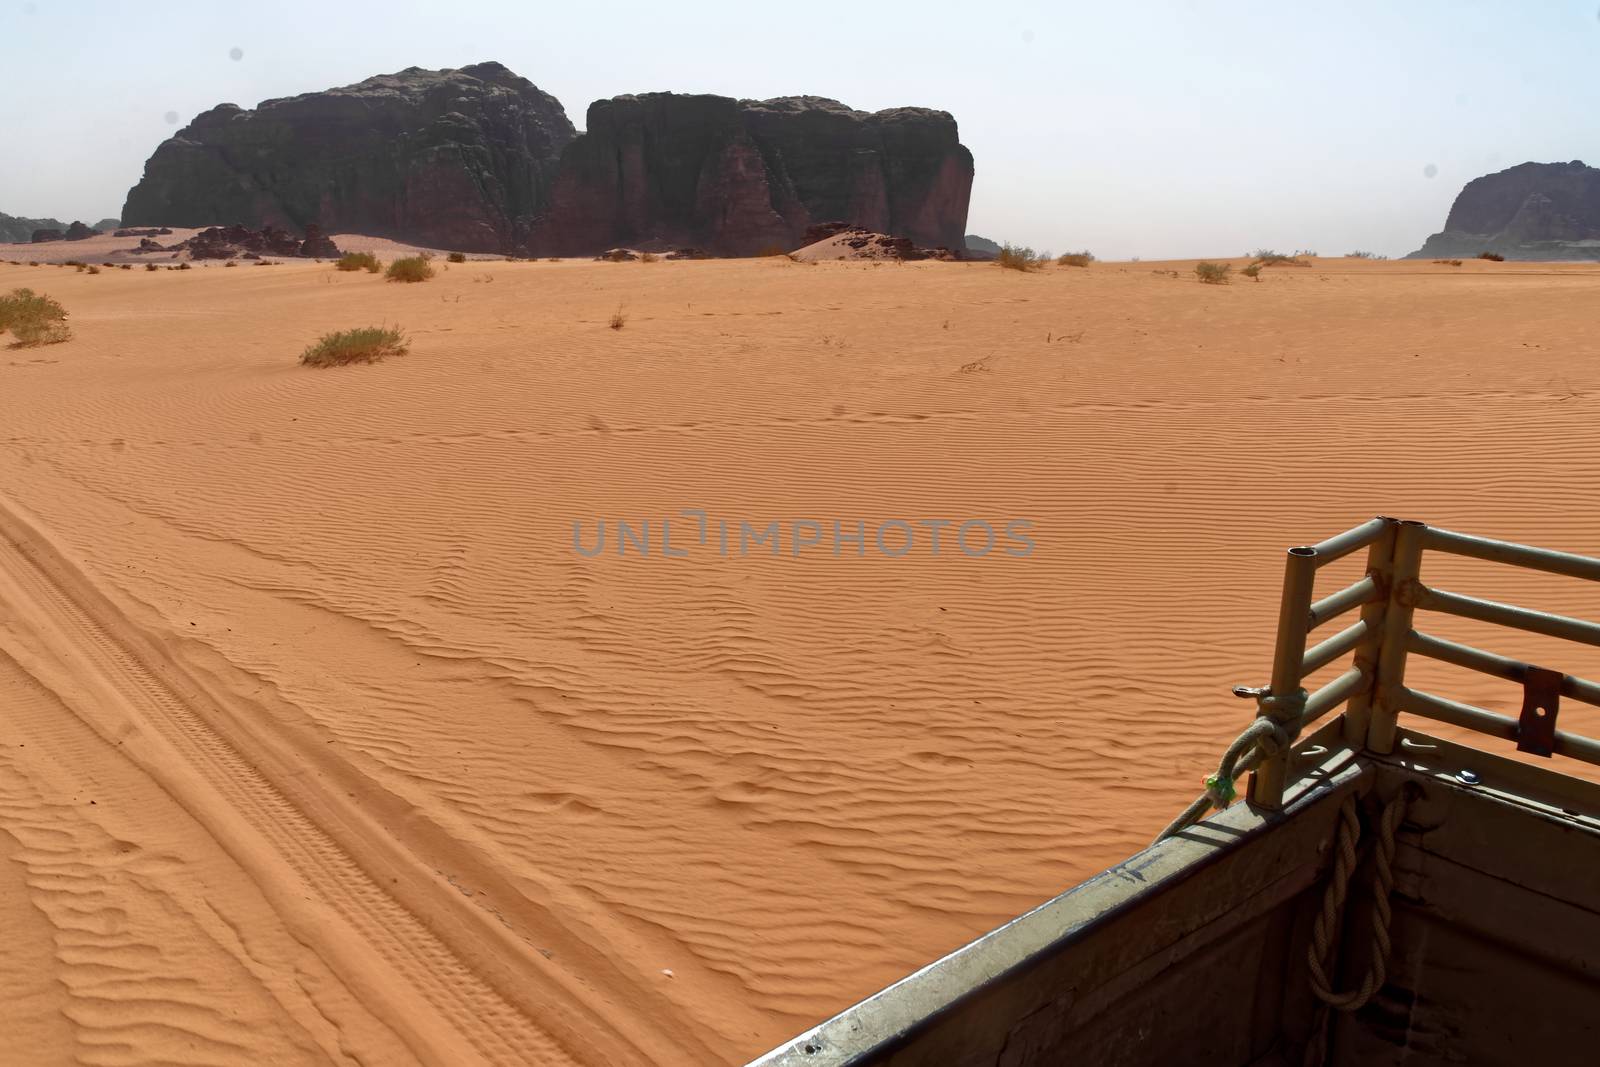 View from the platform of an off-road vehicle to the ripple marks in the desert sand of Wadi Rum, Jordan by geogif